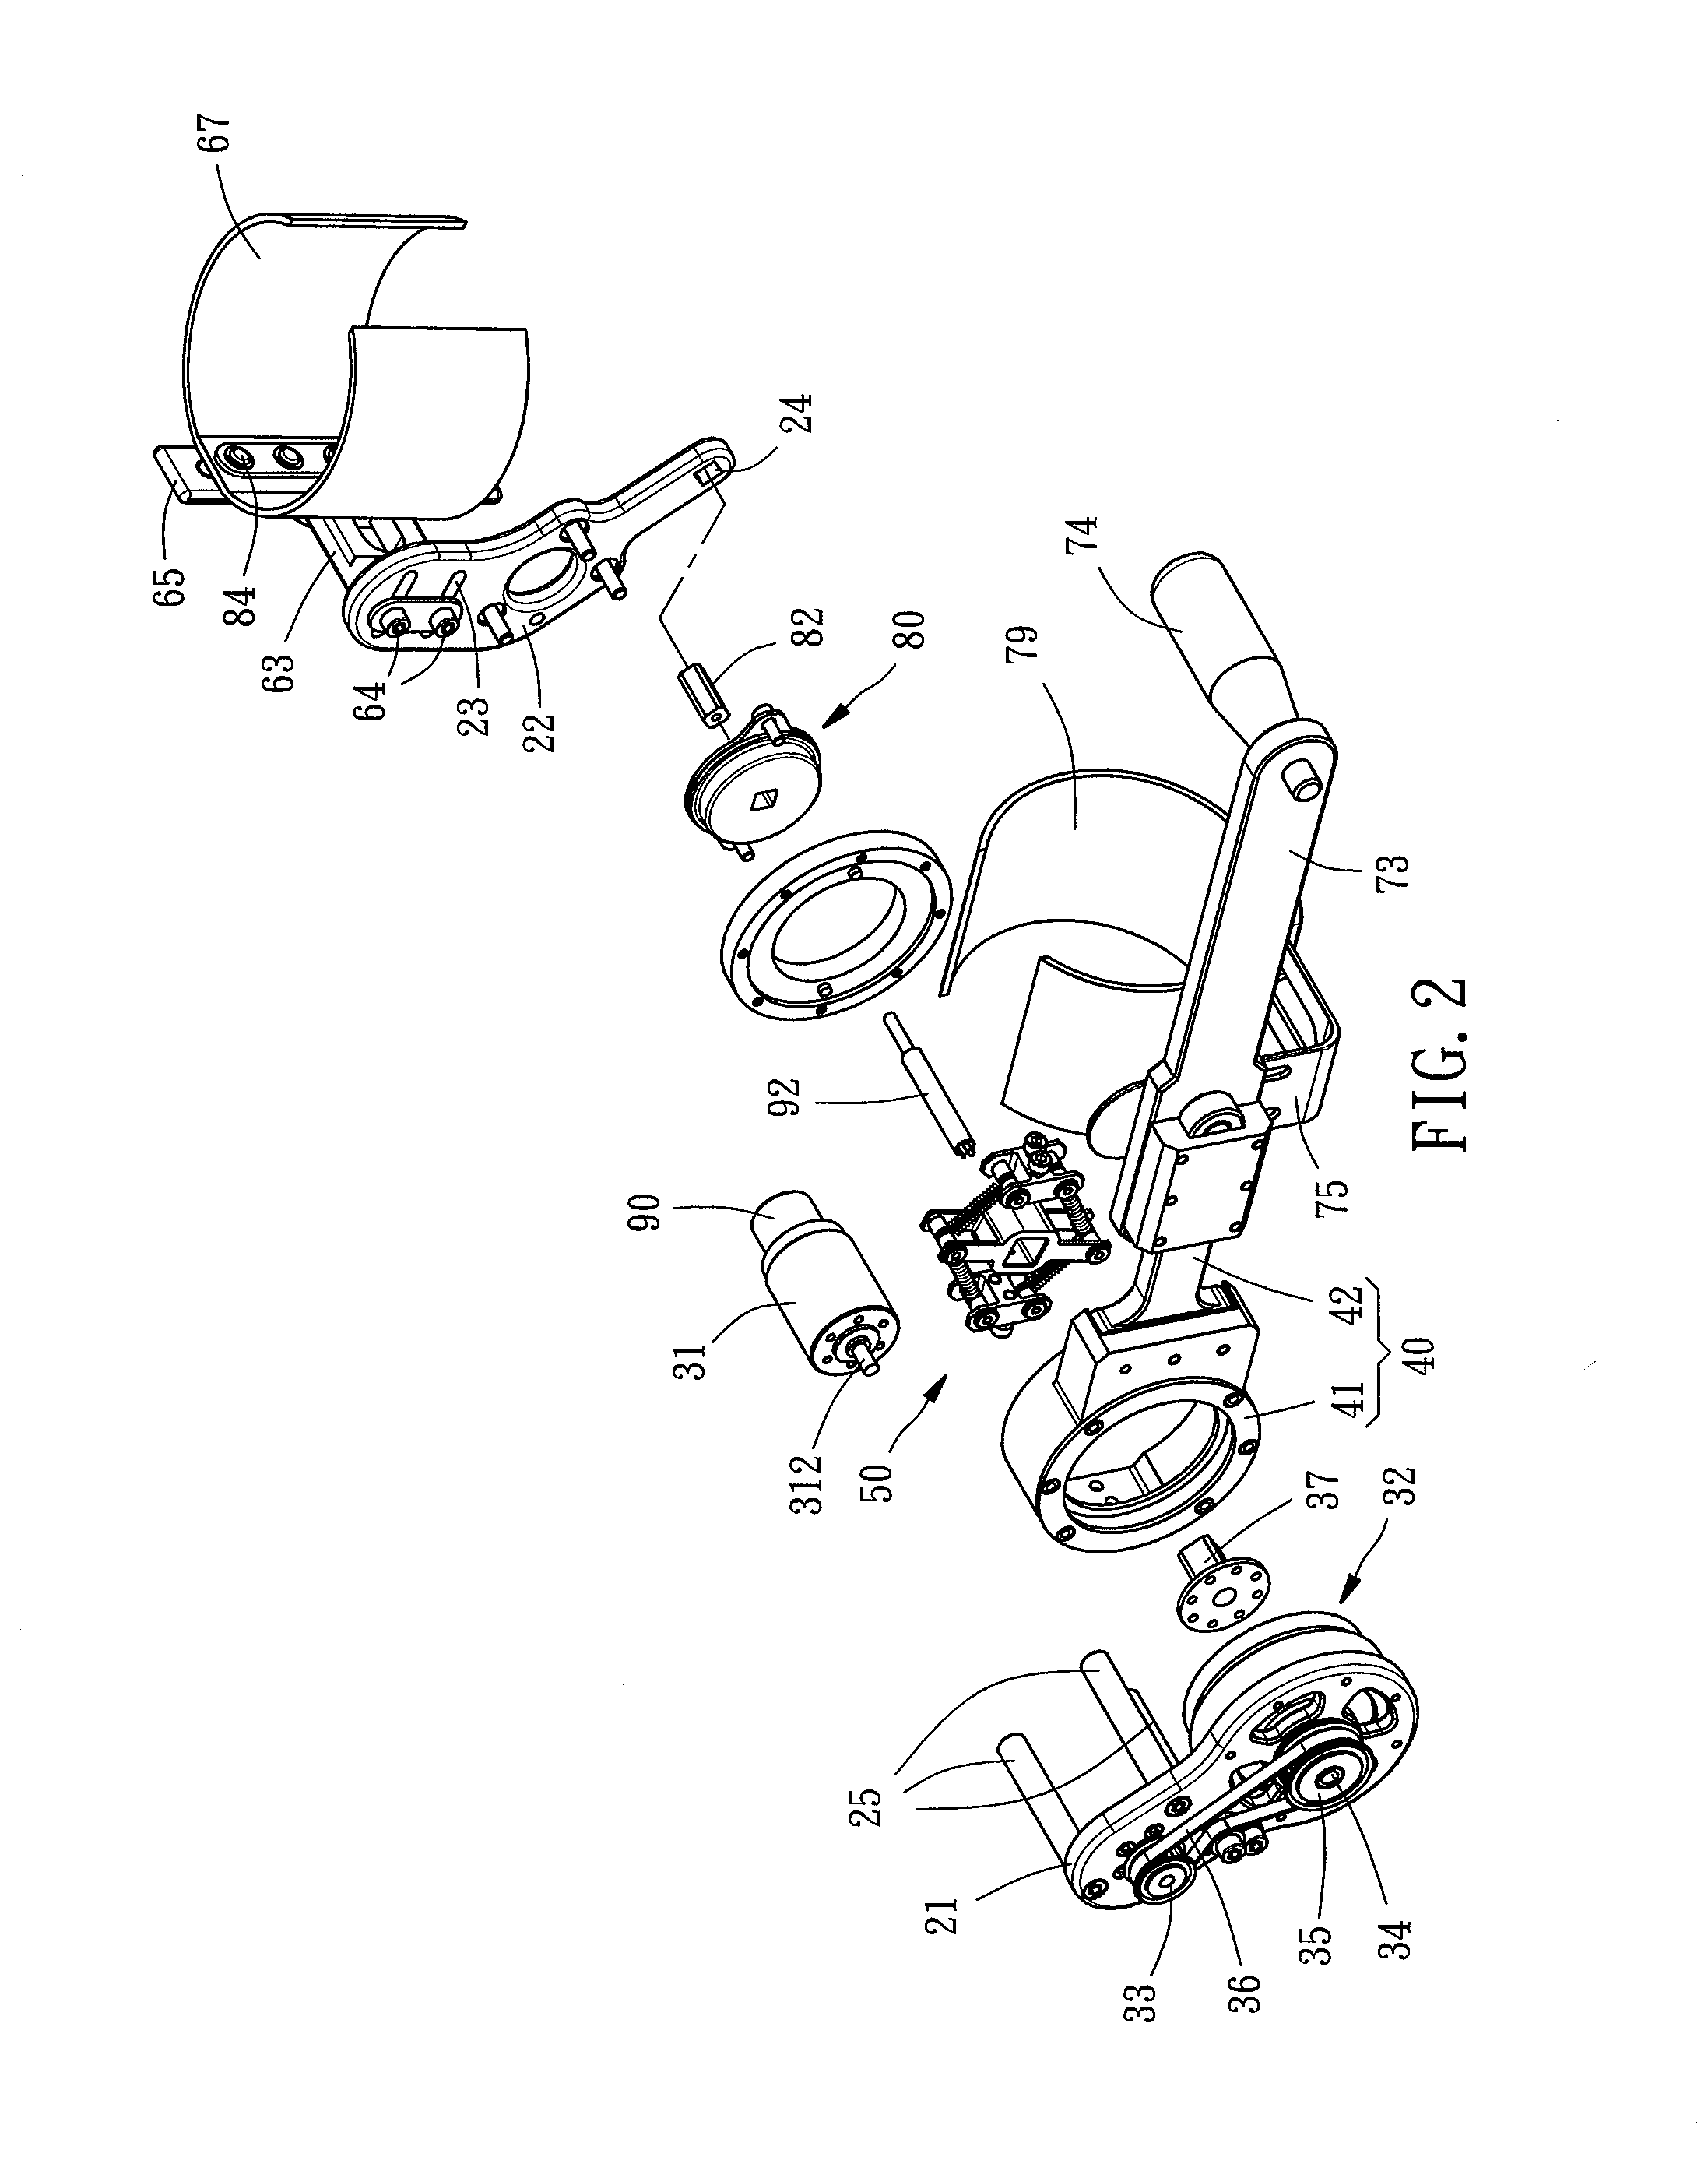 Force feedback type complaint orthotic device